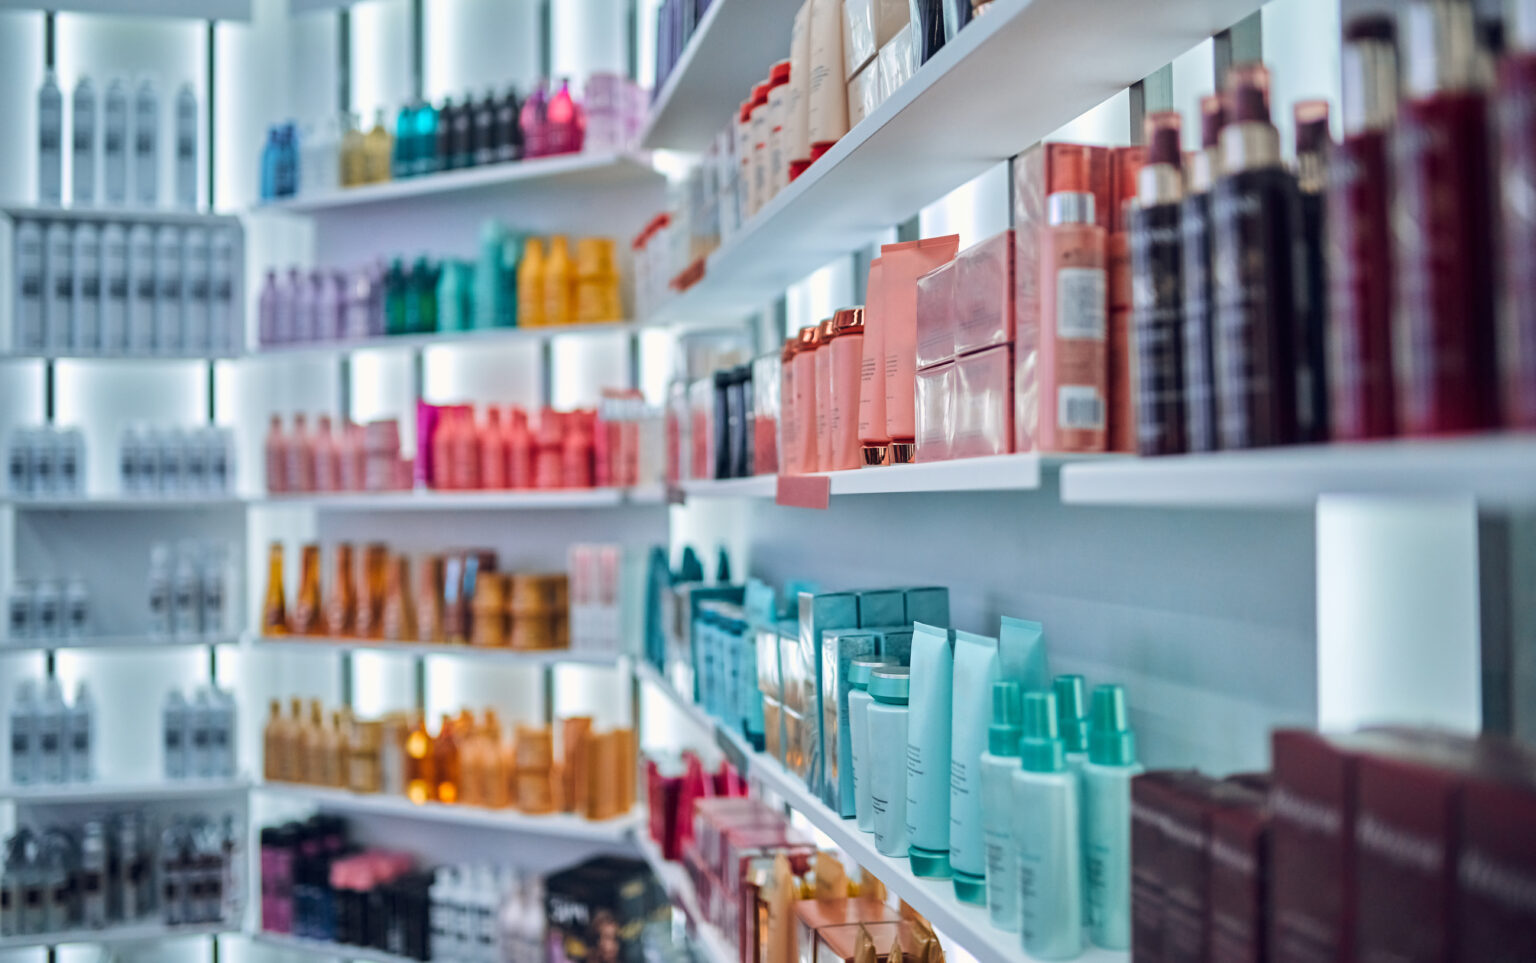 Brazil’s Anvisa Classification of Personal Hygiene Products, Cosmetics & Perfumes